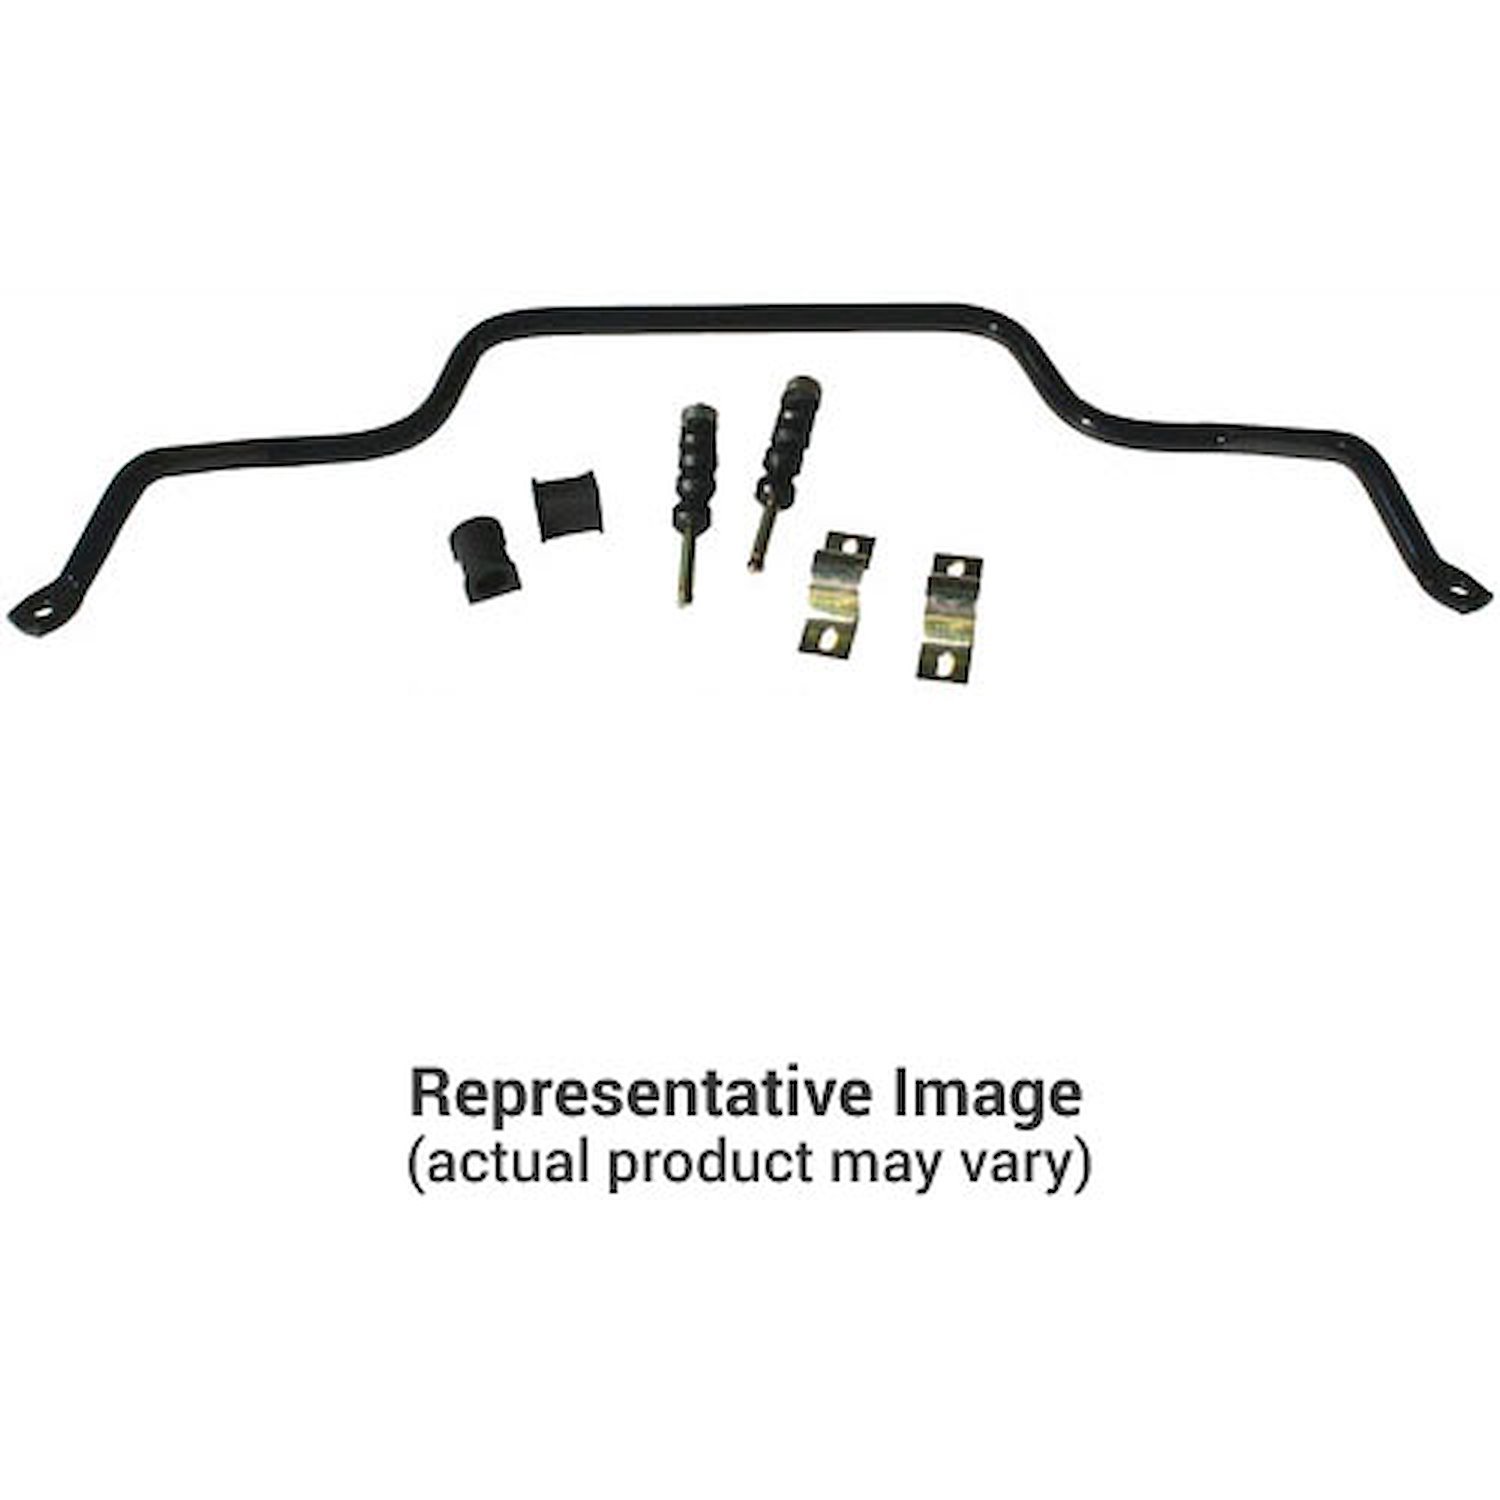 1-1/8" Front Sway Bar 1996-98 Grand Cherokee & Limited